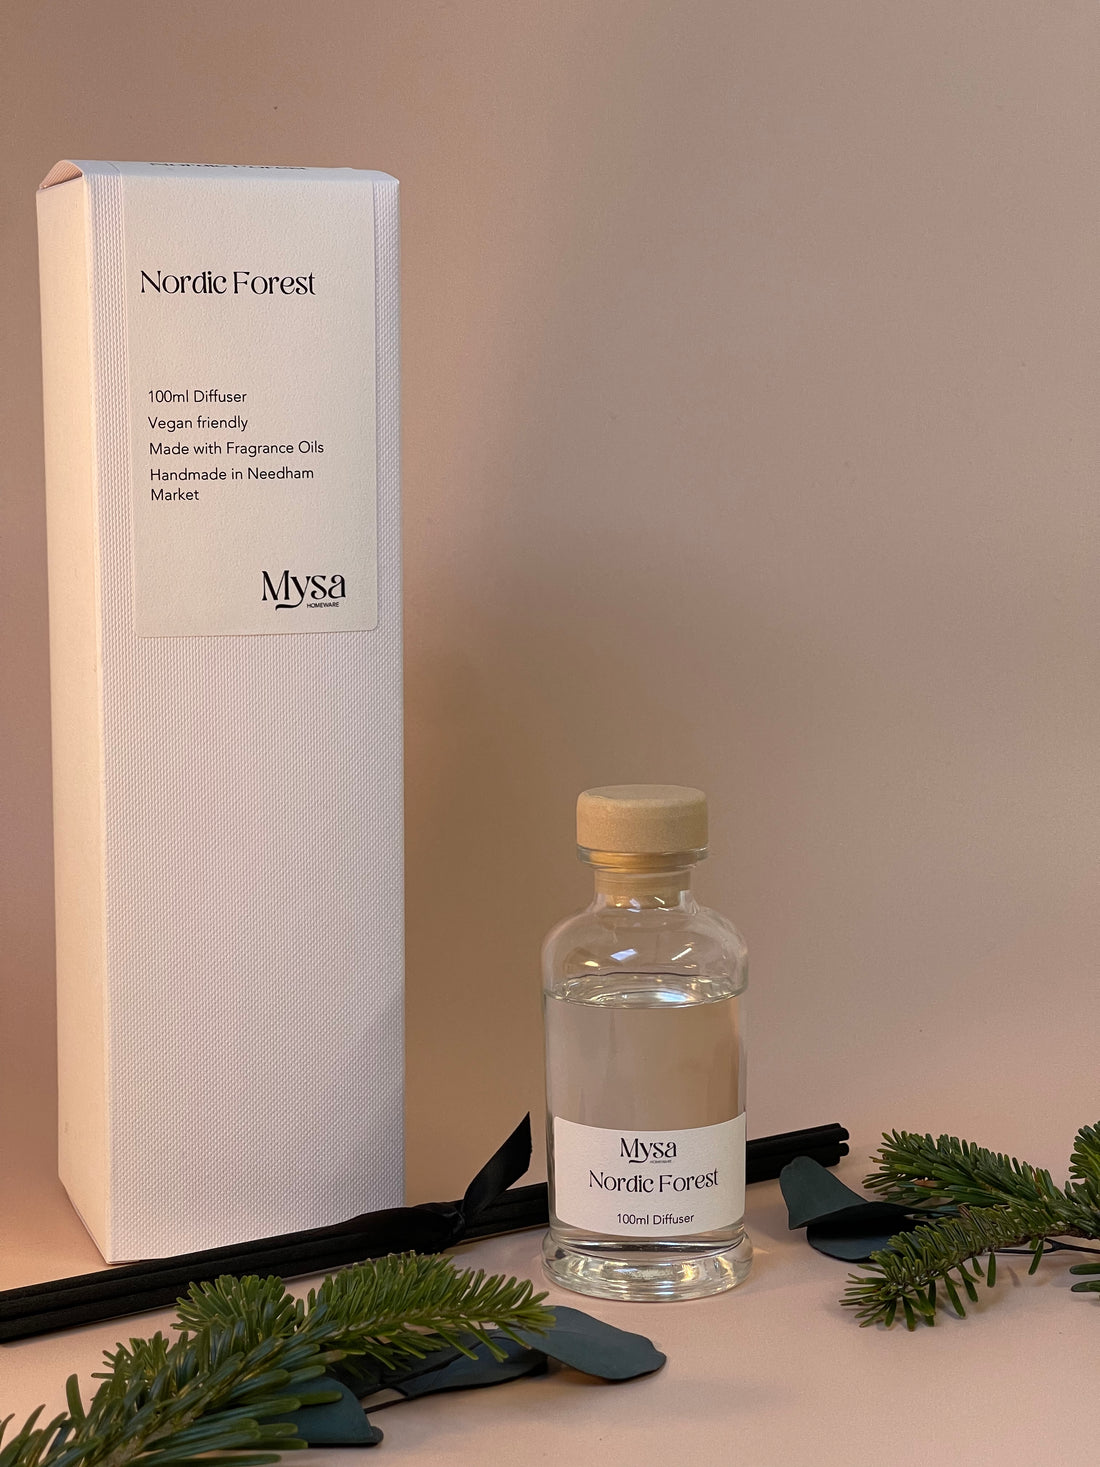 Nordic Forest luxury reed diffuser in gift box, featuring a vegan base oil infused with pine and eucalyptus fragrance.